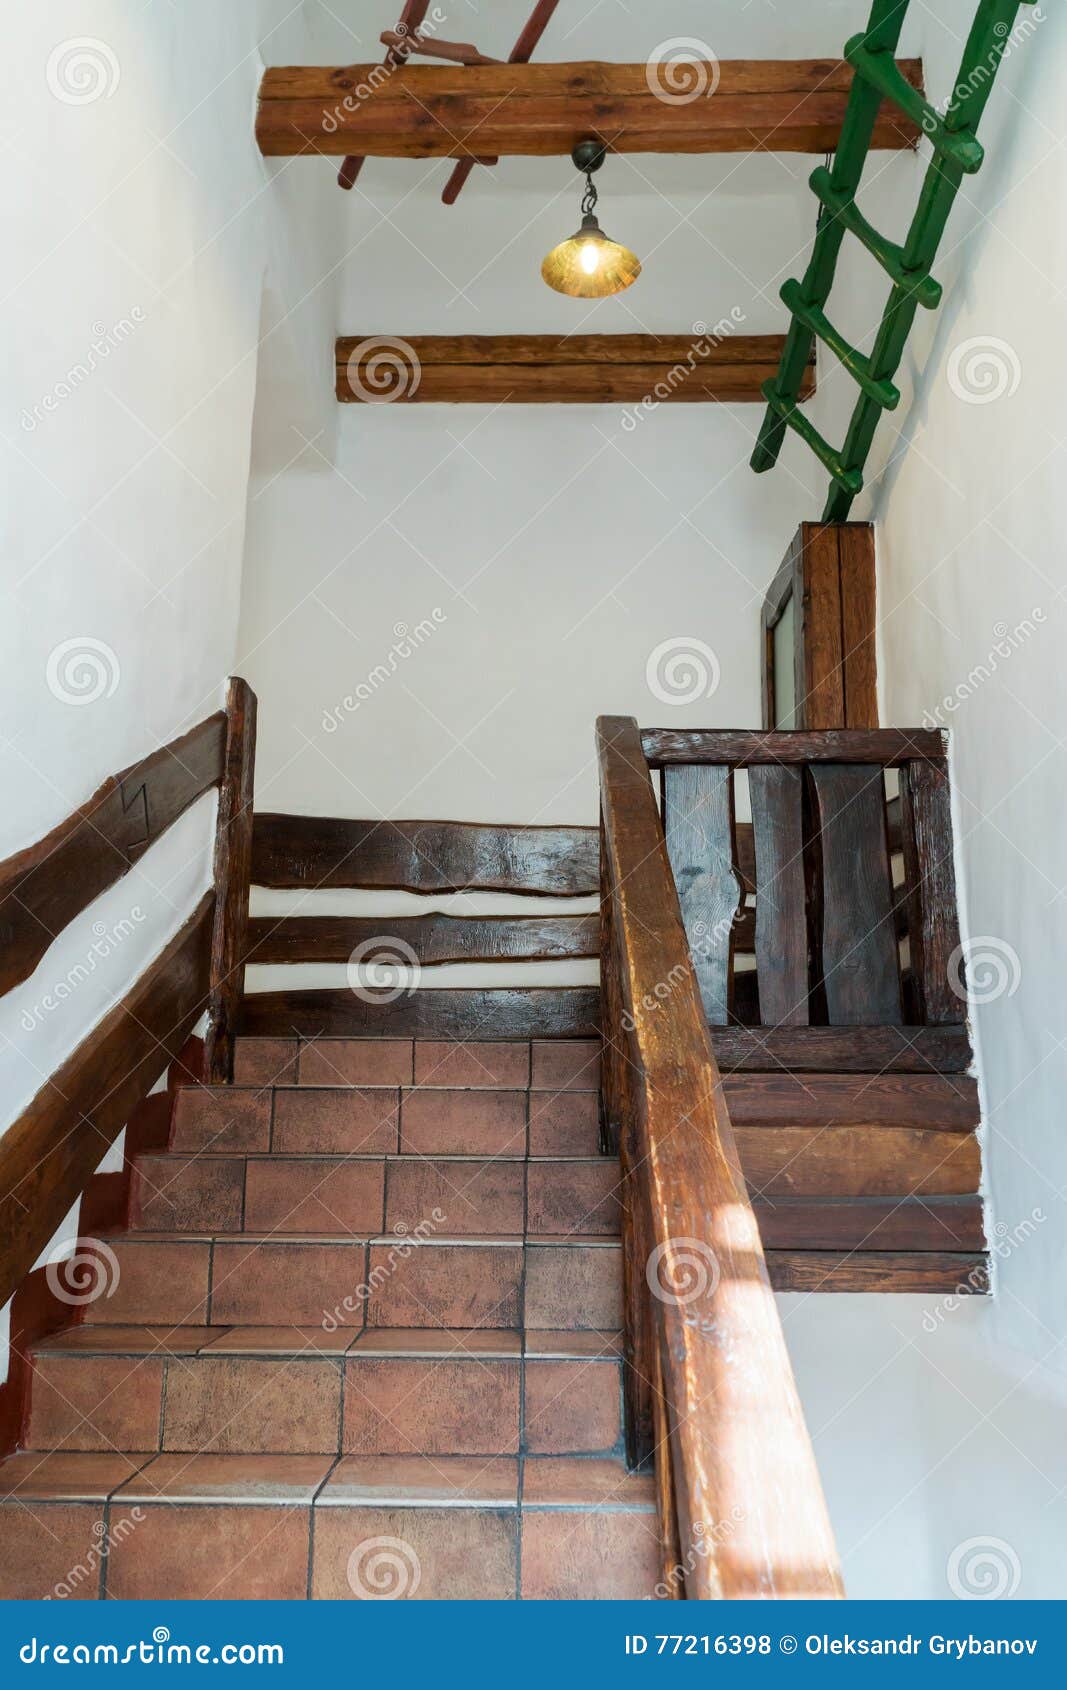 Decorative Stairs With Railings Stock Photo Image Of Decor